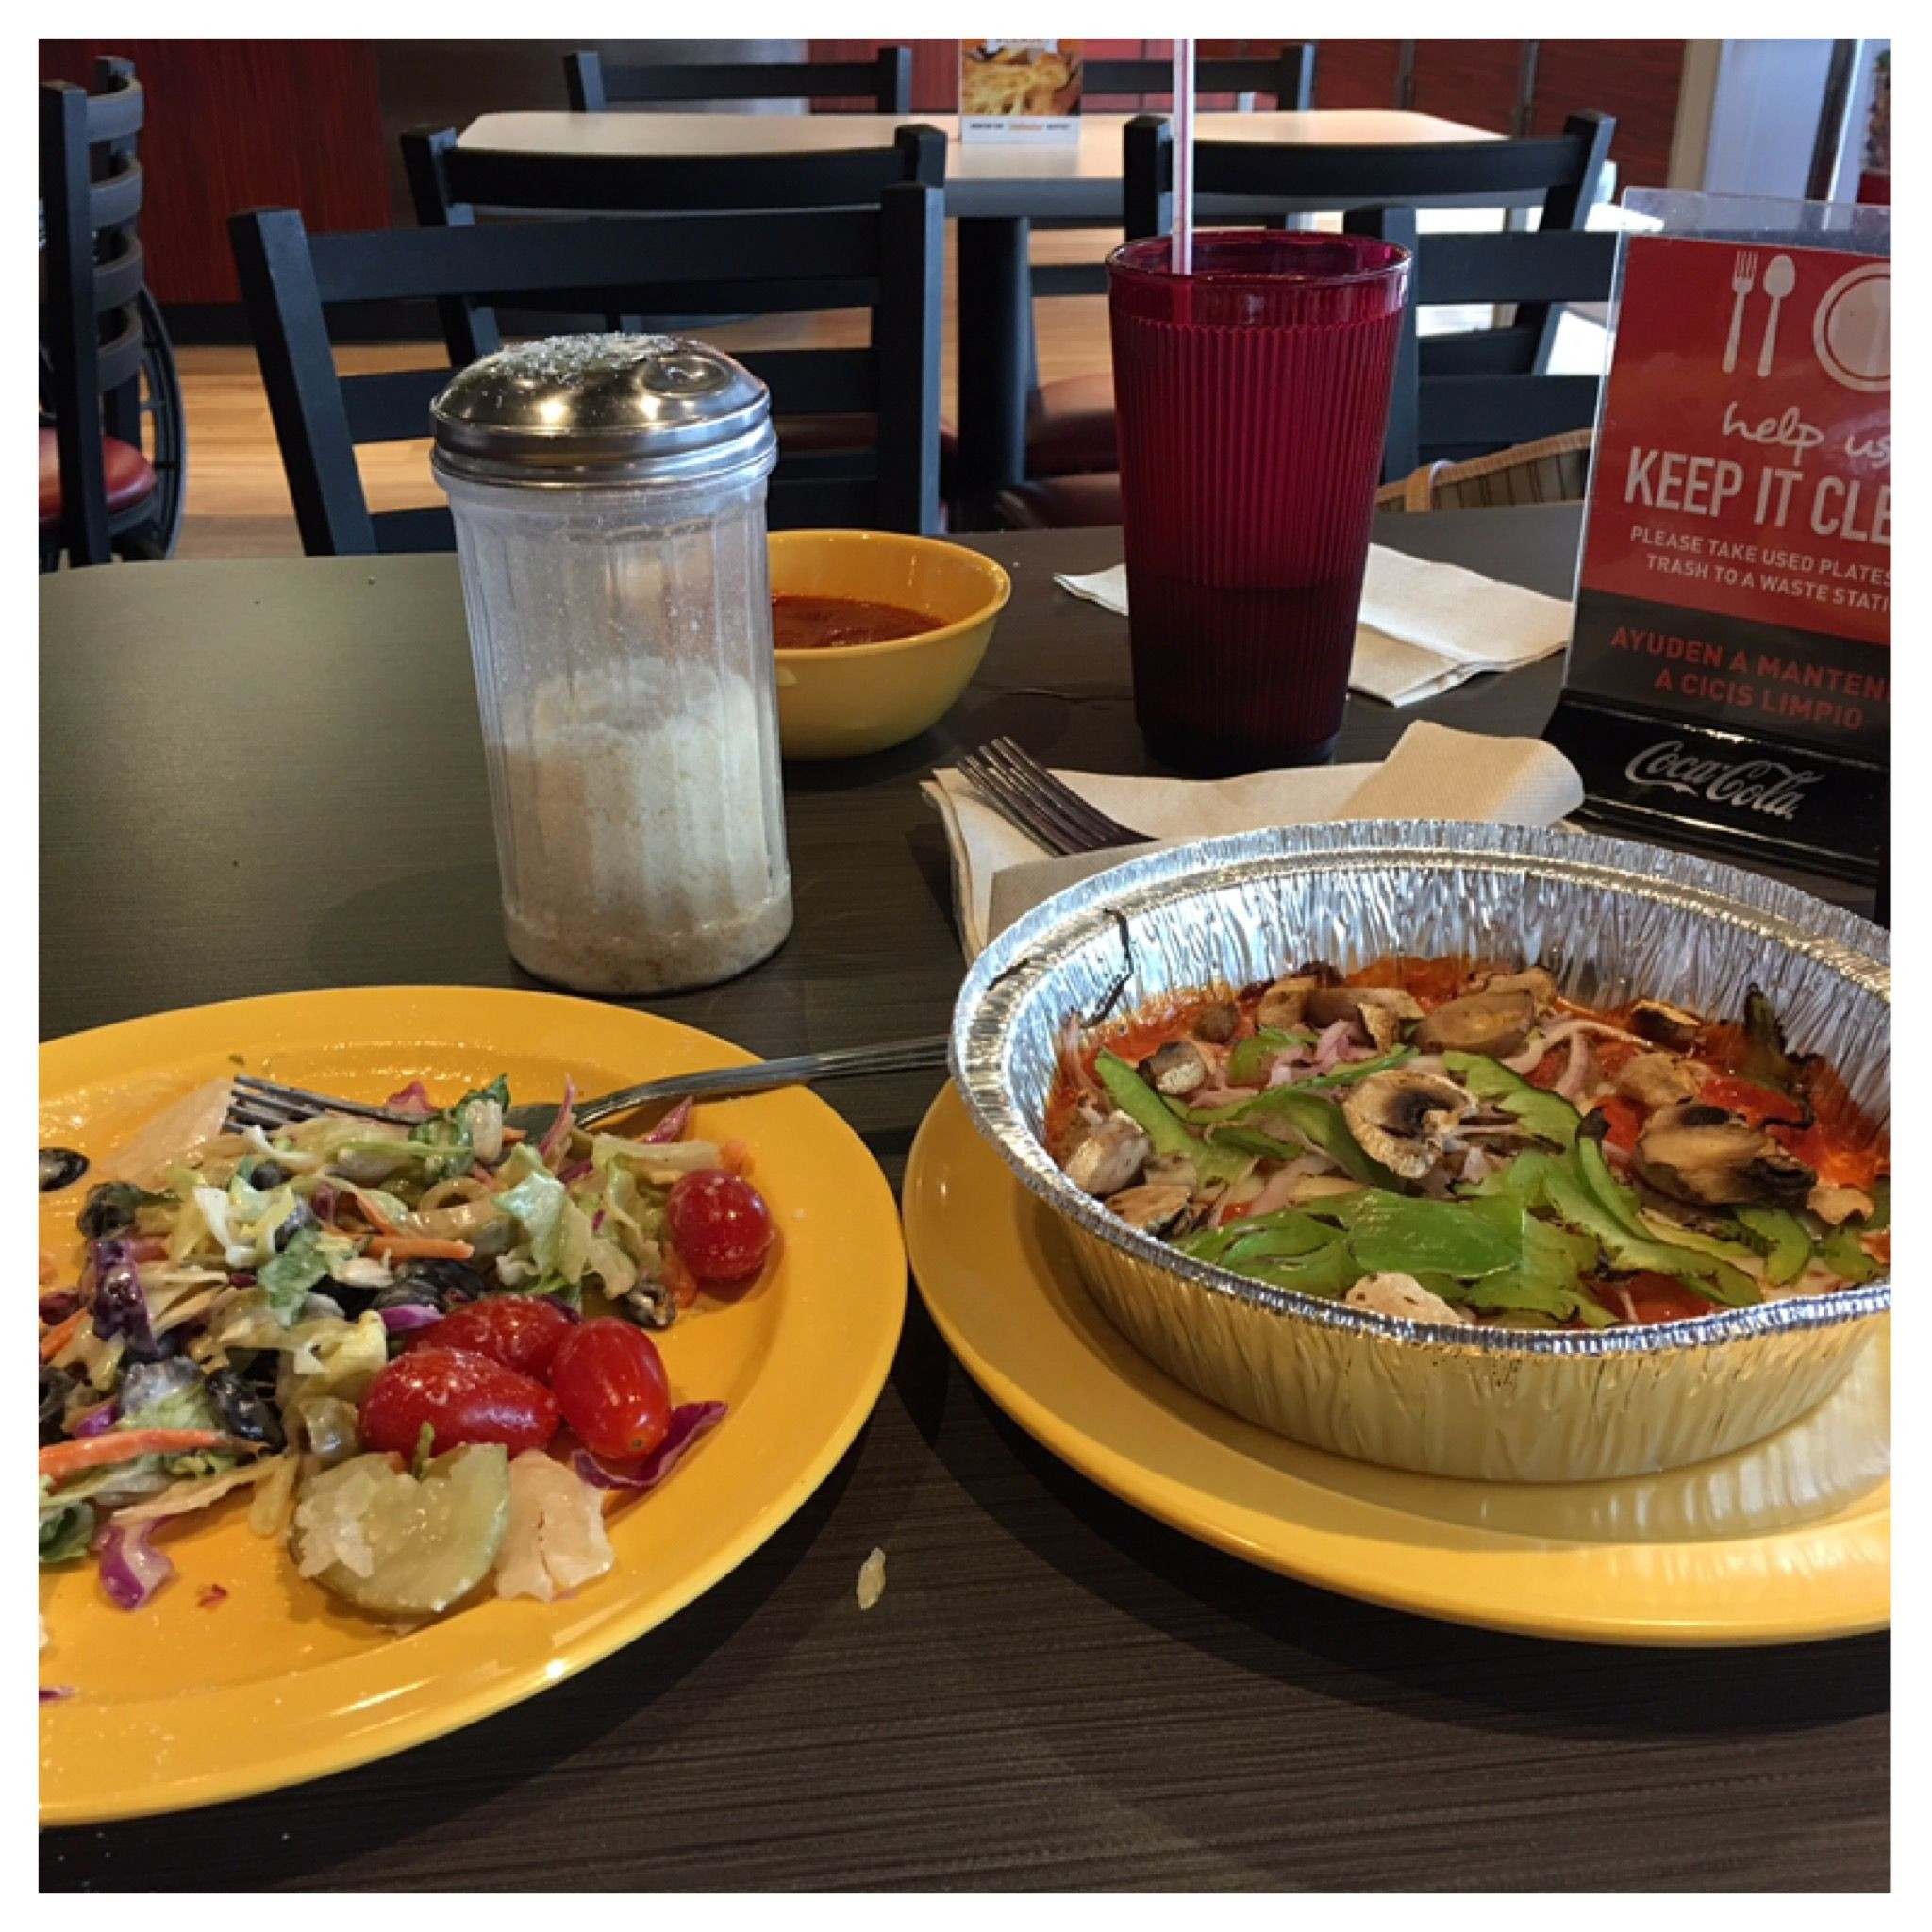 Low Carb Desserts At Restaurants
 Cici s pizza crustless pizza and salad